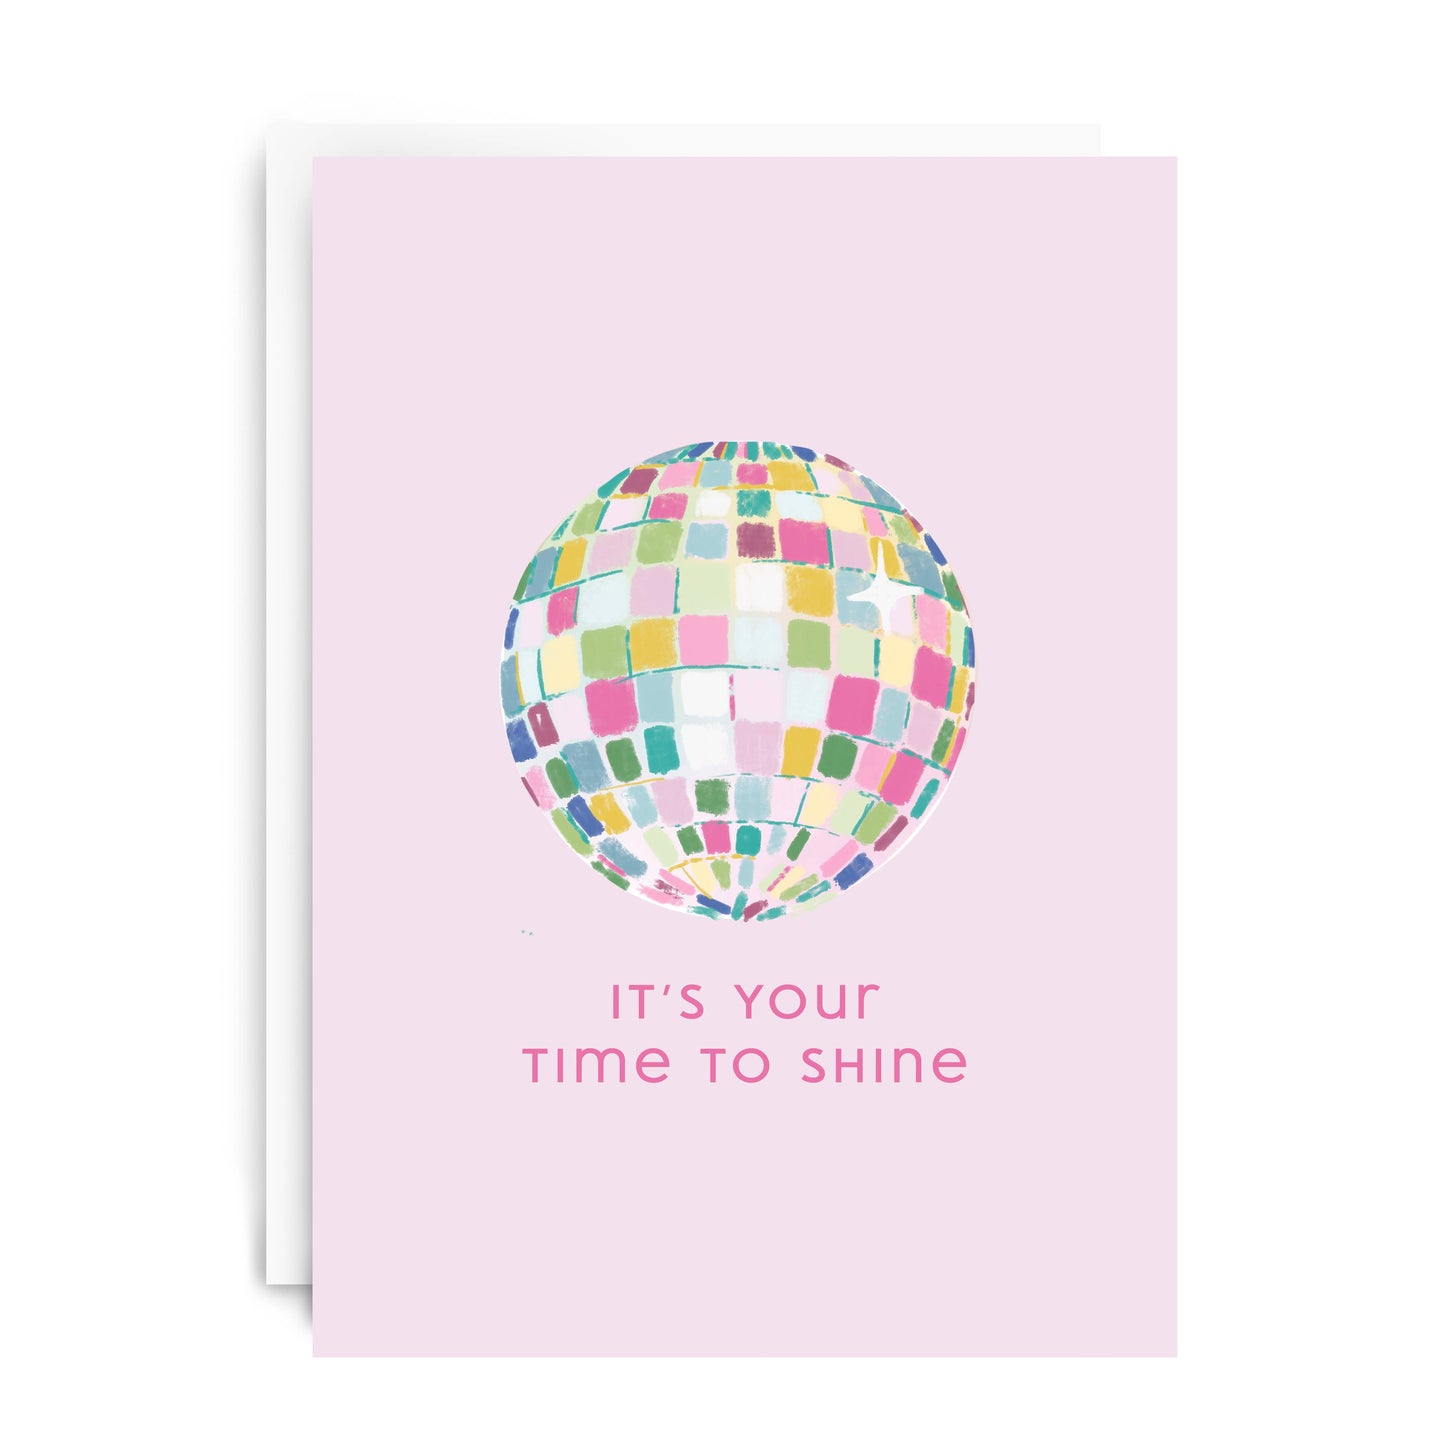 It's Your Time to Shine" Greeting Card